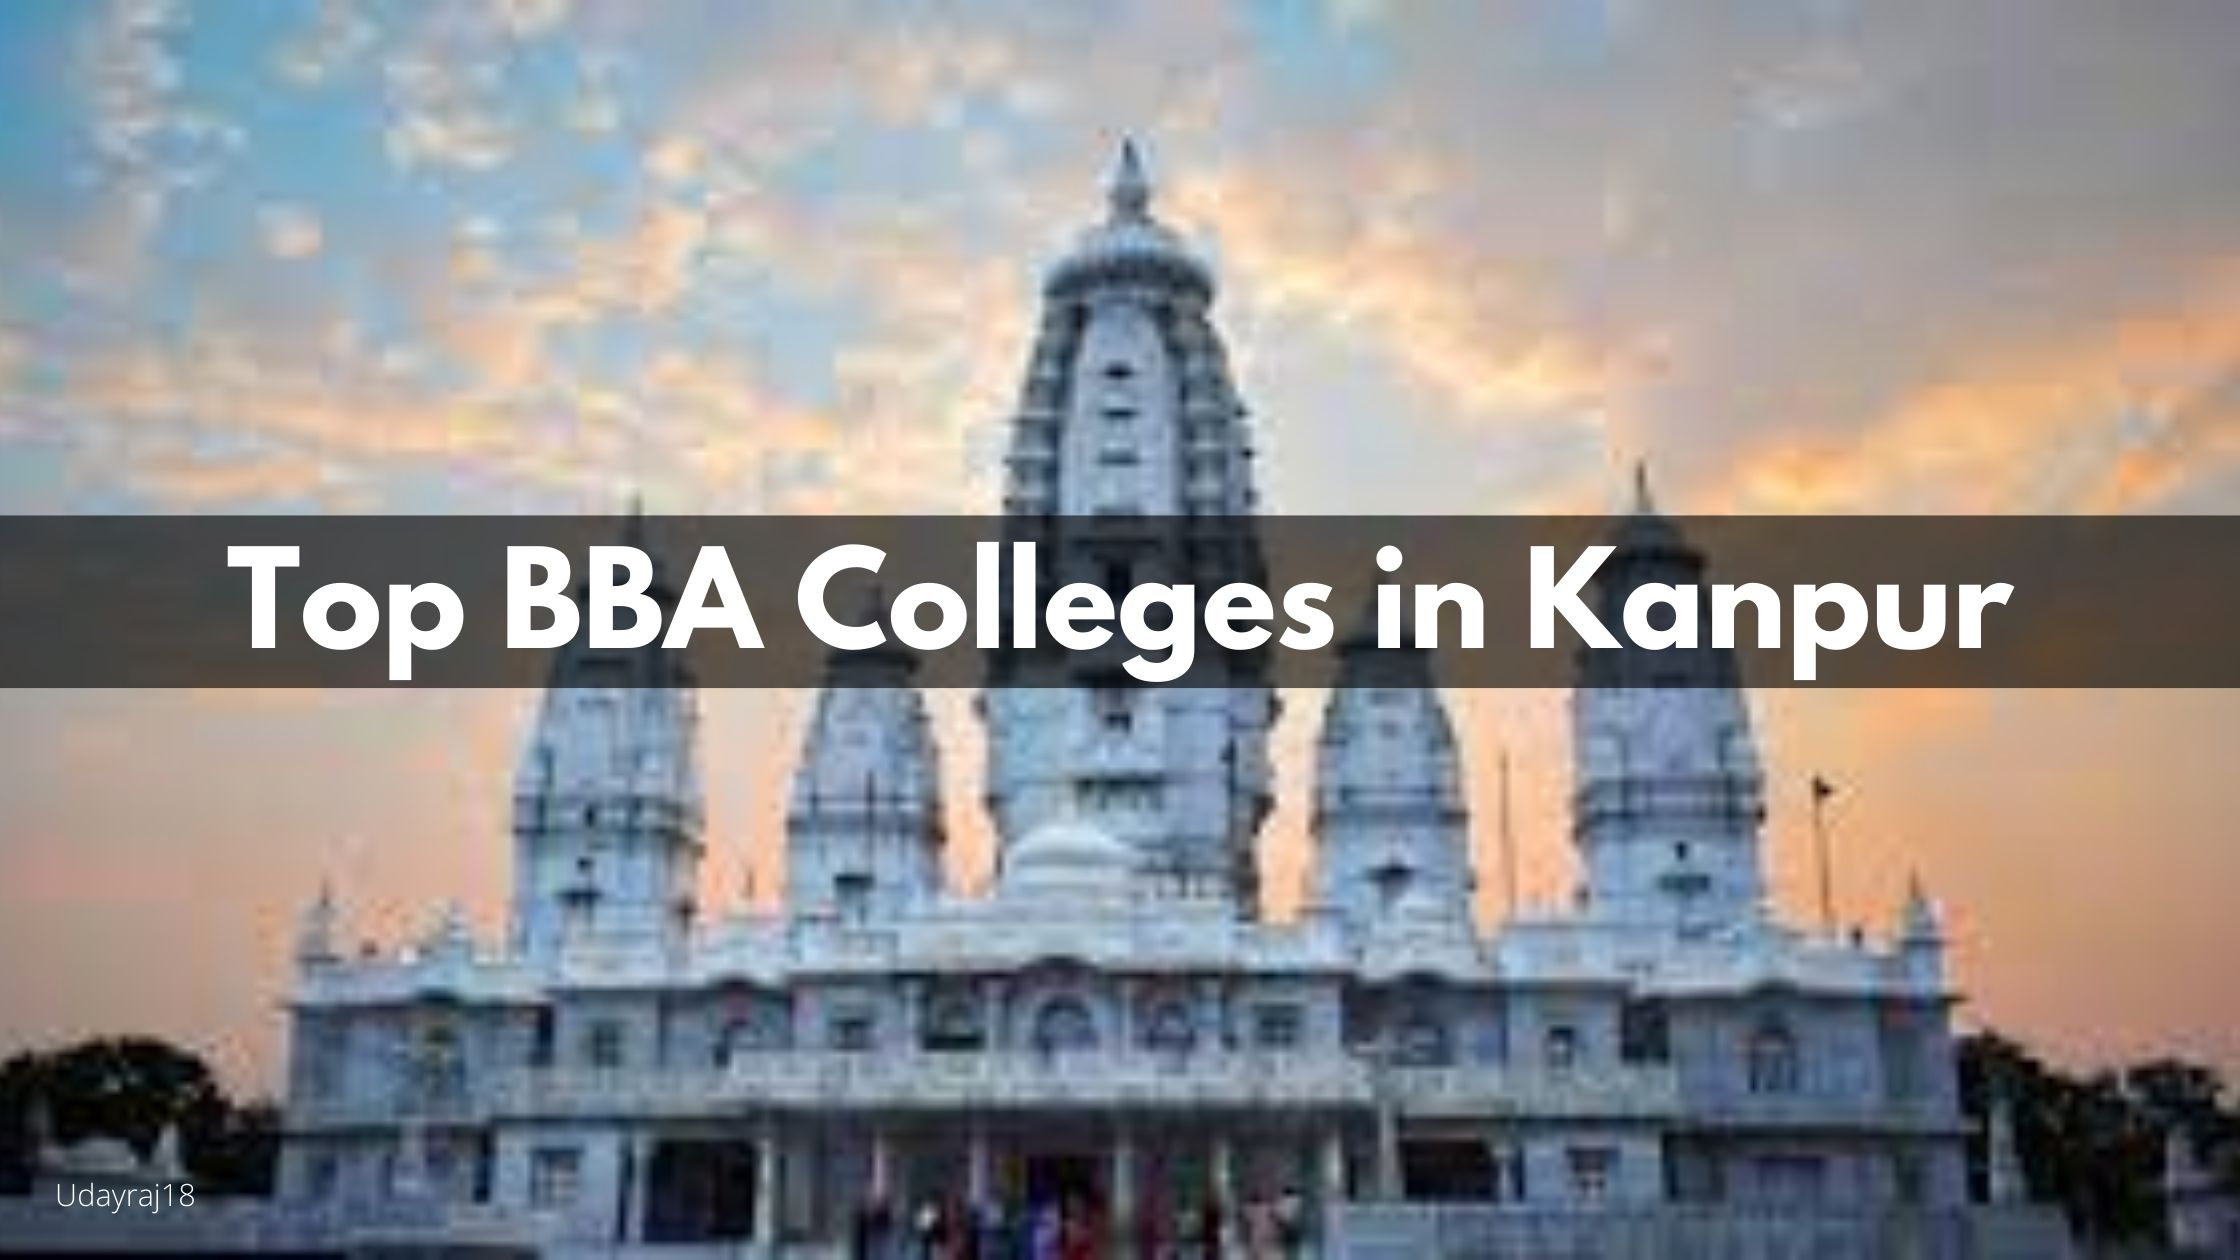 Top BBA Colleges in Kanpur